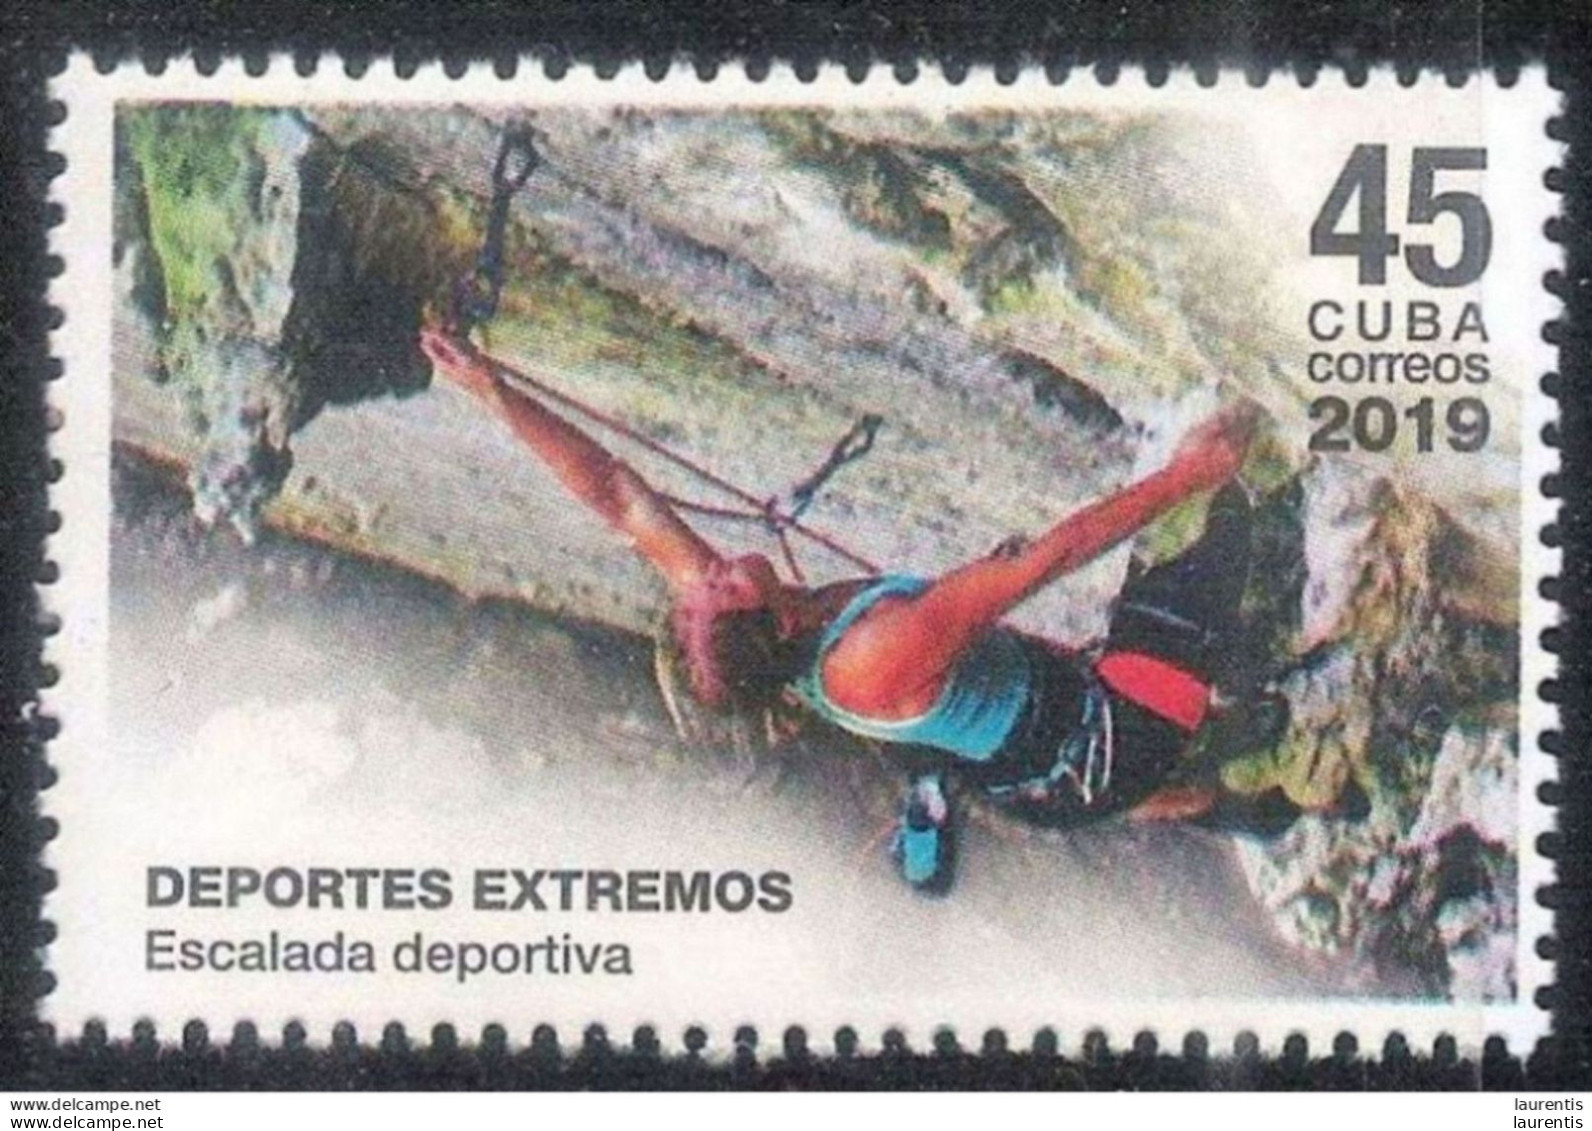 1253  Climbing - Only This One In The Stamp Set - MNH - Cb - 1,25 - Climbing